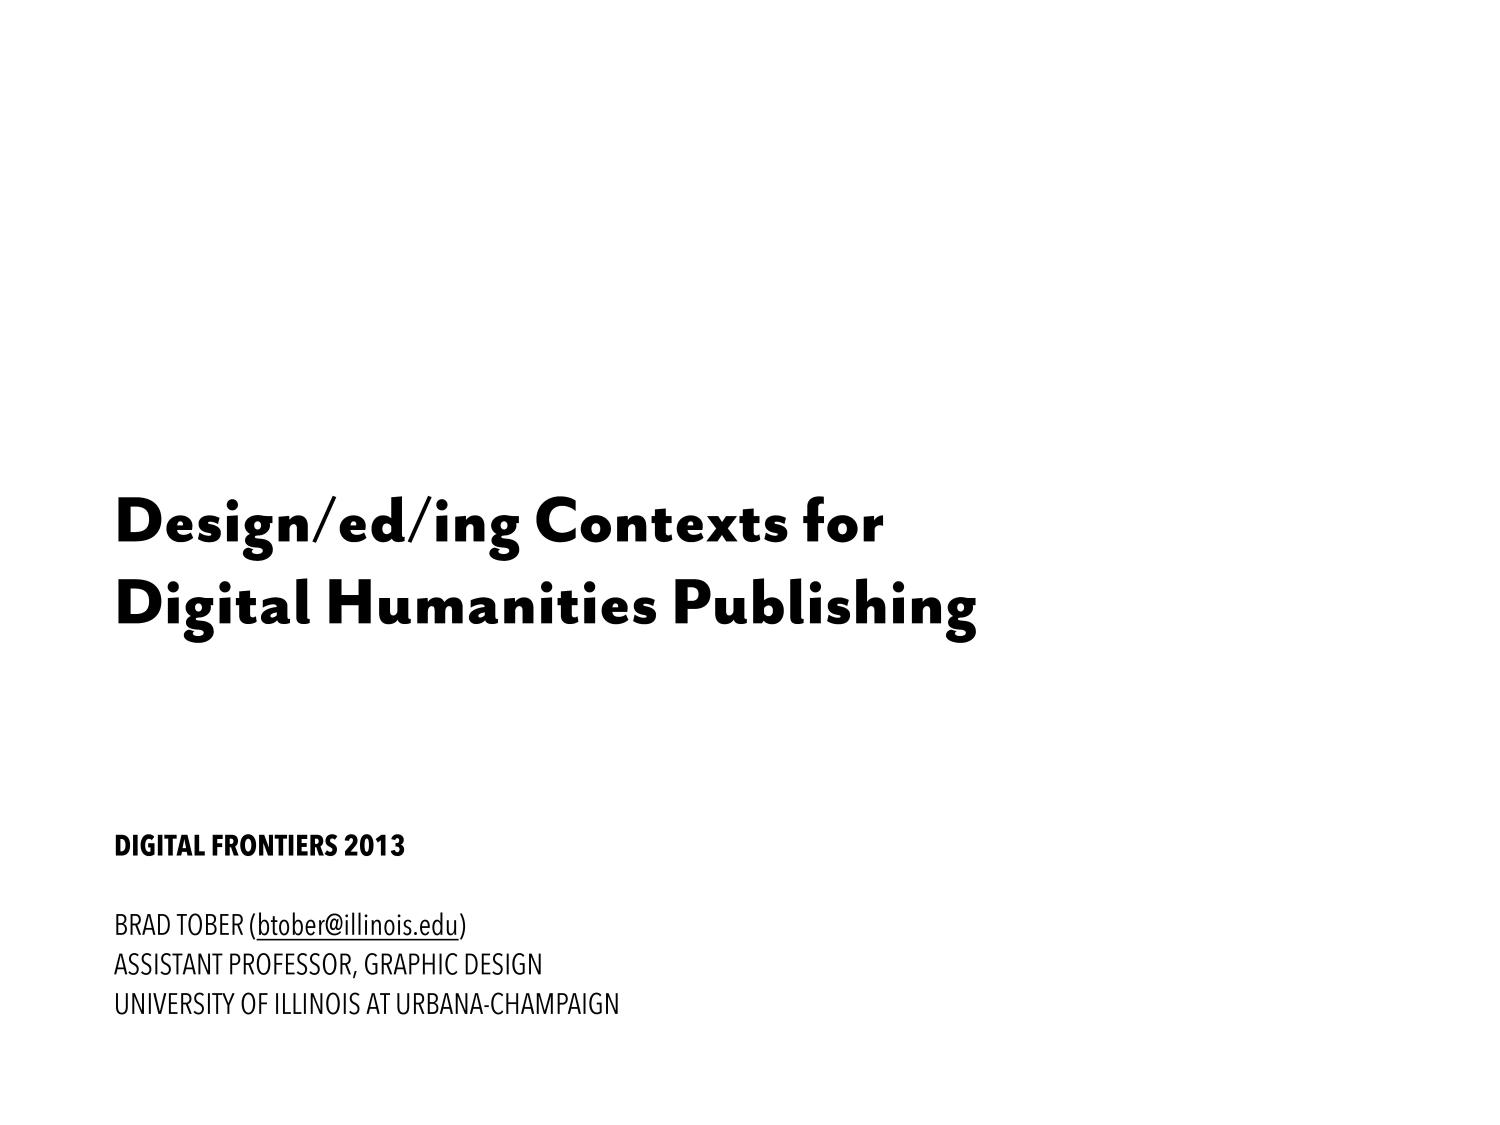 Design/ed/ing Contexts for Digital Humanities Publishing
                                                
                                                    [Sequence #]: 1 of 28
                                                